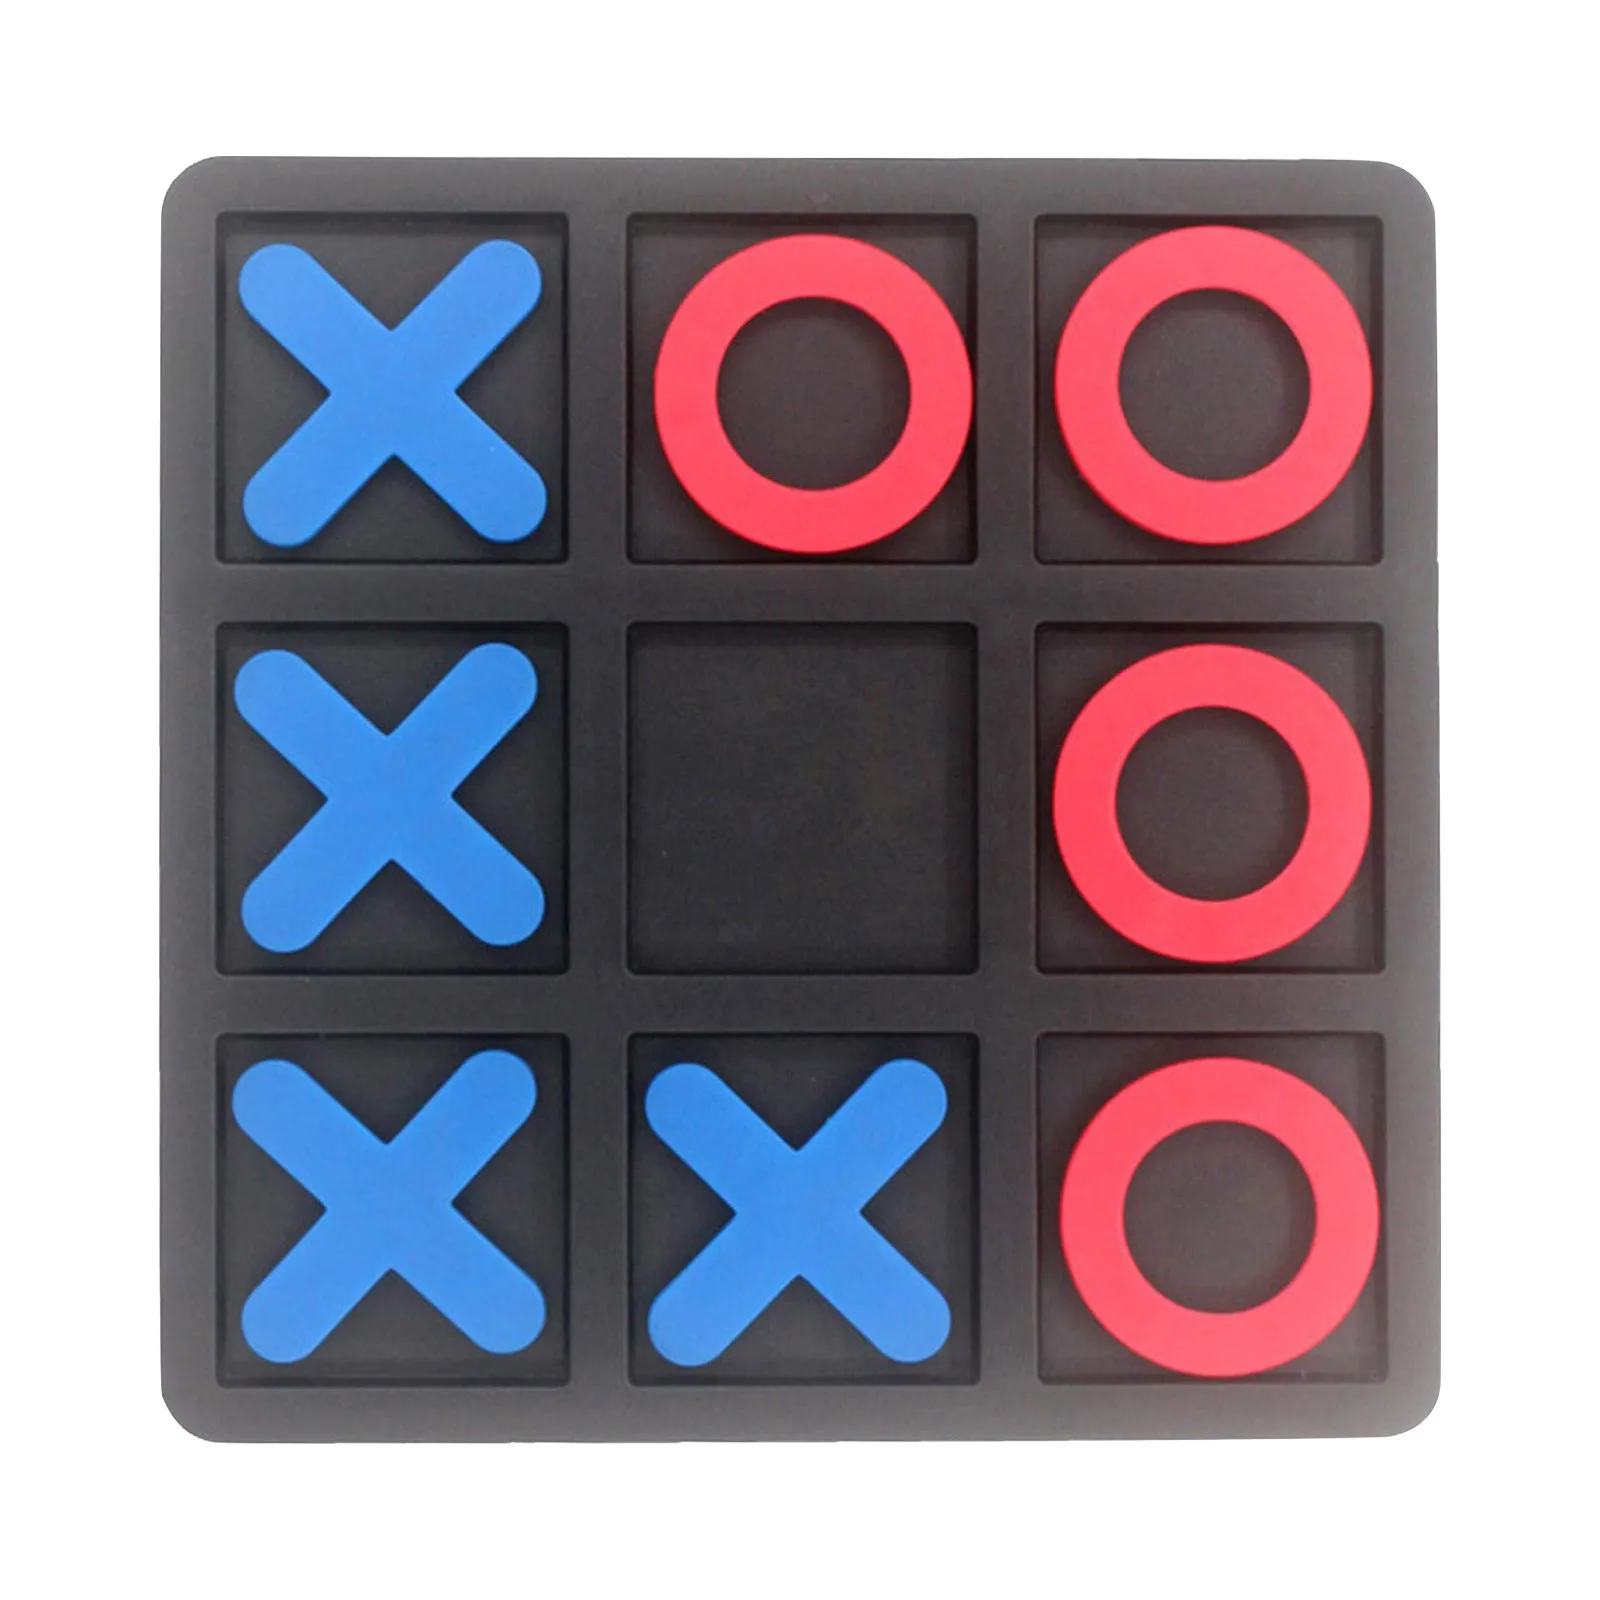 

Plastic O X Tic-Tac-Toe Chess Children Puzzle Toys Set Brain Teaser Exercising Tool Learning Development Chess Kids Toy Gifts f5